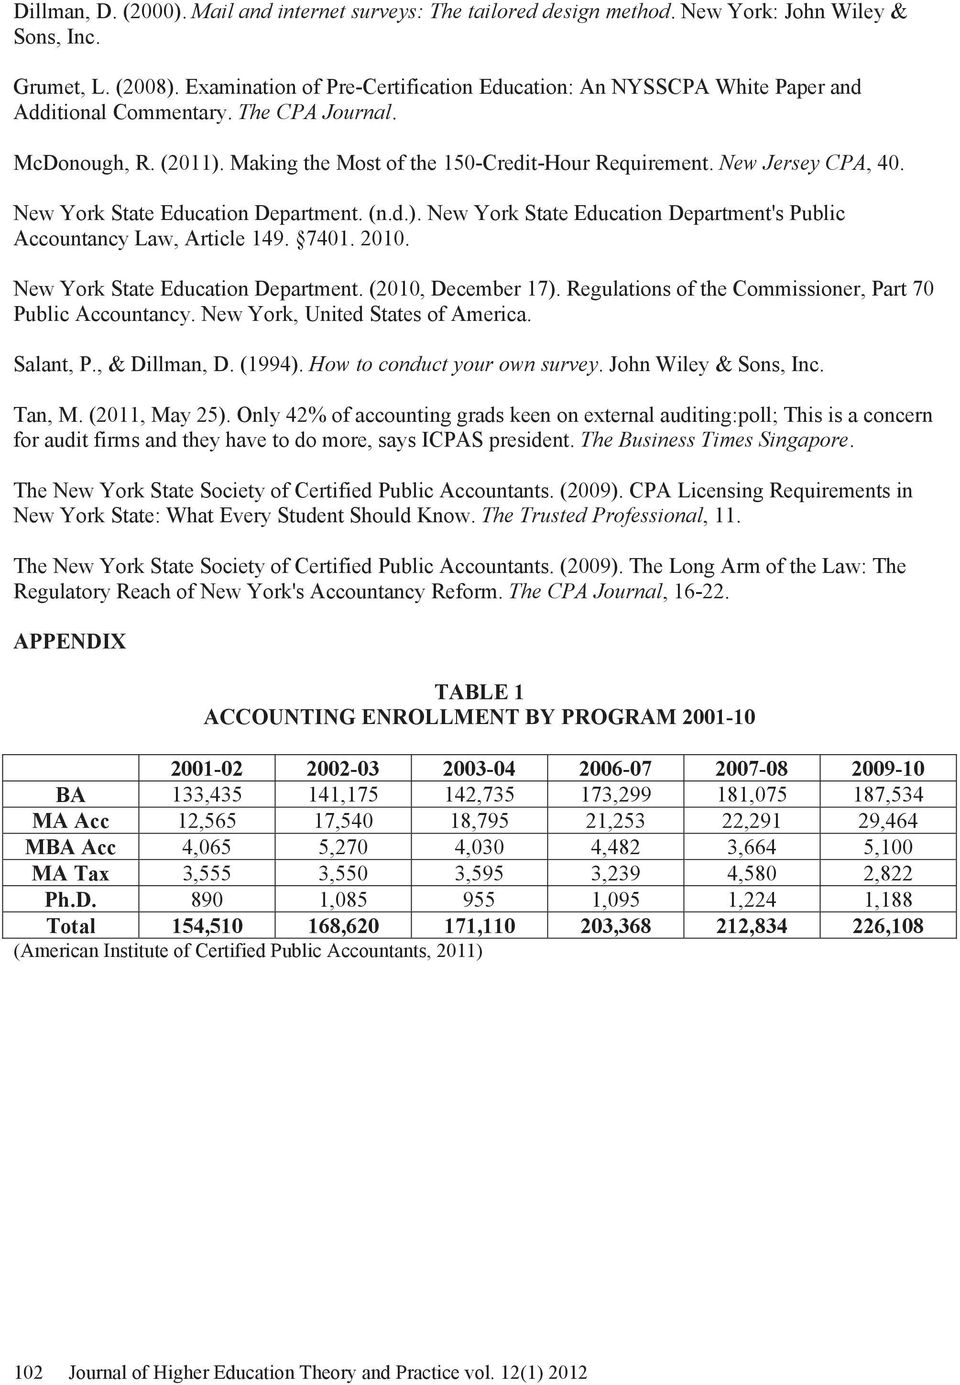 New York State Education Department. (n.d.). New York State Education Department's Public Accountancy Law, Article 9. 0. 20. New York State Education Department. (20, December ).